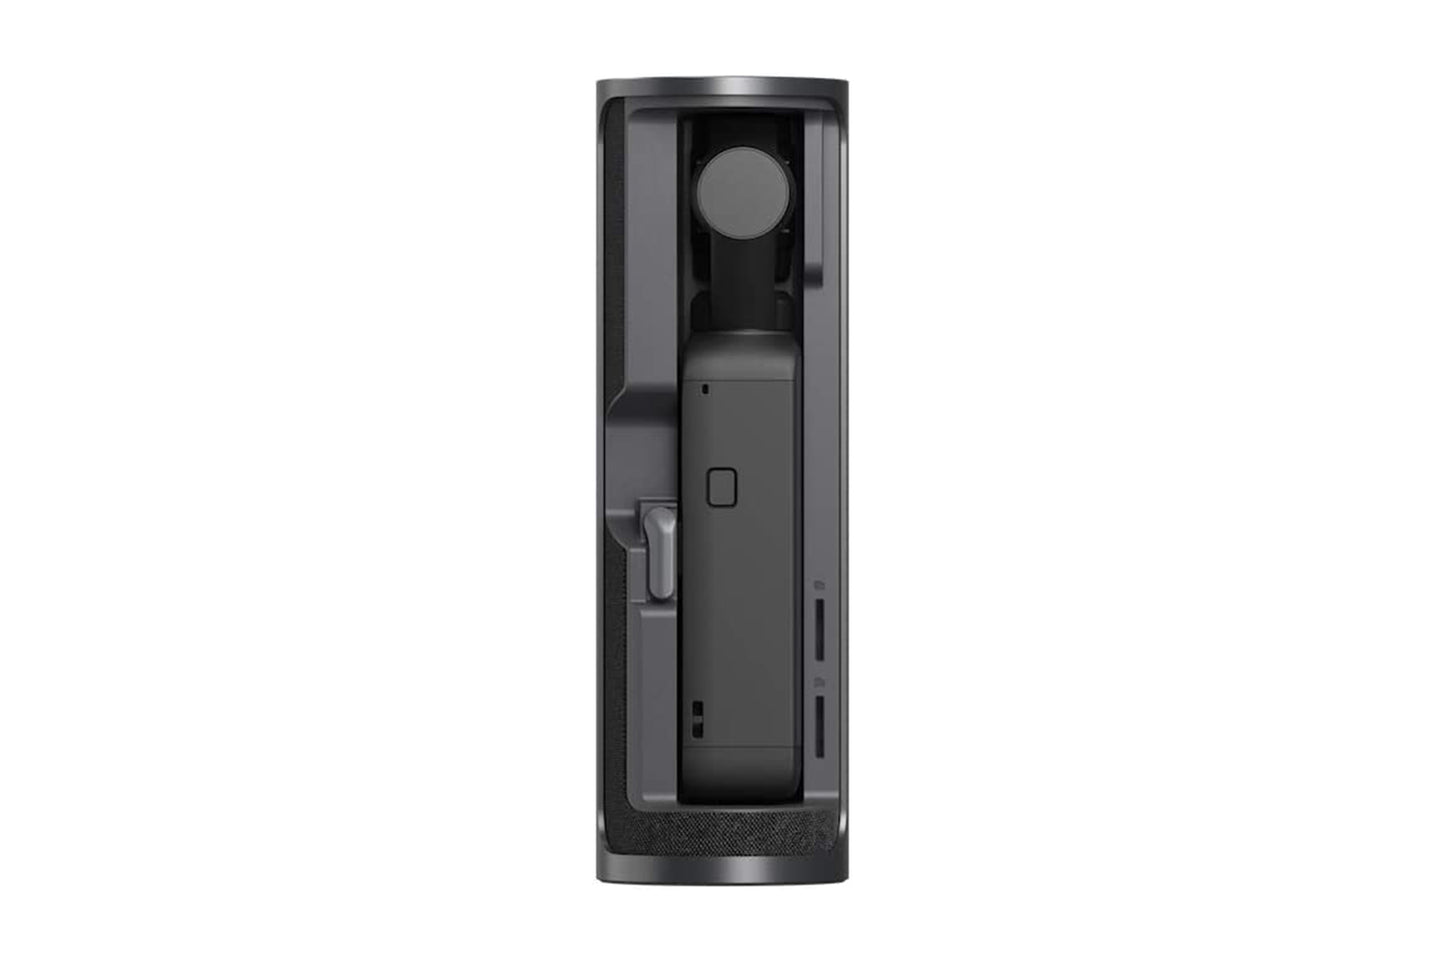 DJI Pocket 2 Charging Case 1500mAh with Compartments for 2 microSD, 4 ND Filters, 2 Smartphone Adapters, and Built-In Lanyard Loop